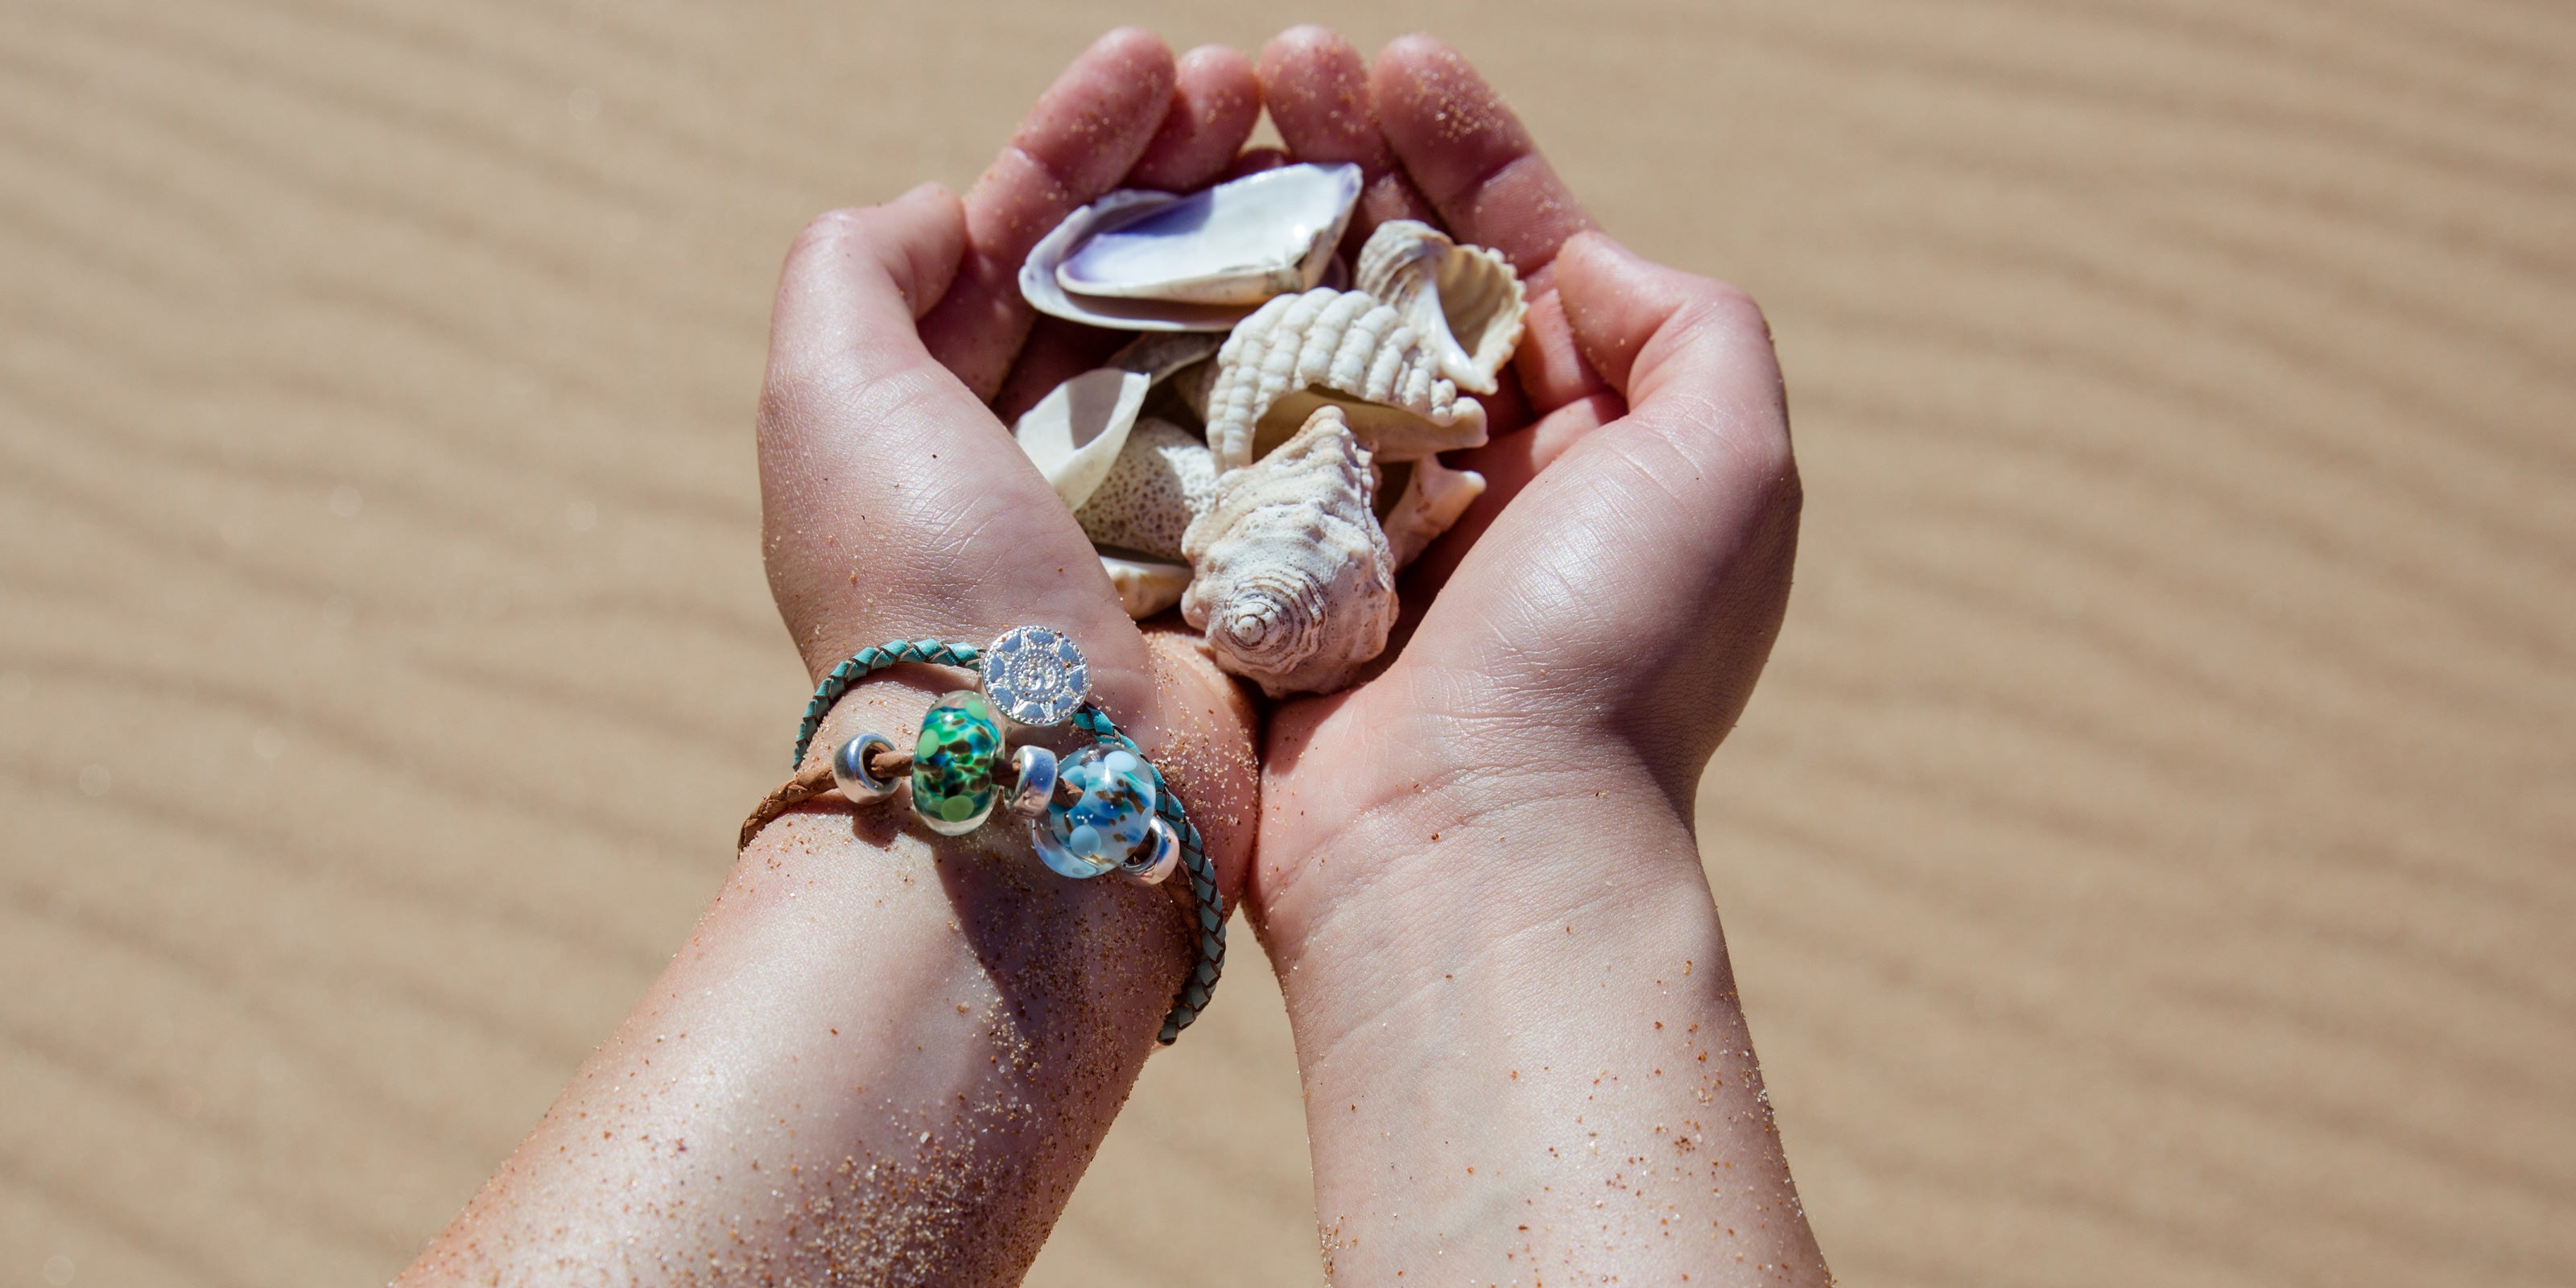 Jersey and Guernsey surf collection beads on bracelet, collecting shells on the beach.